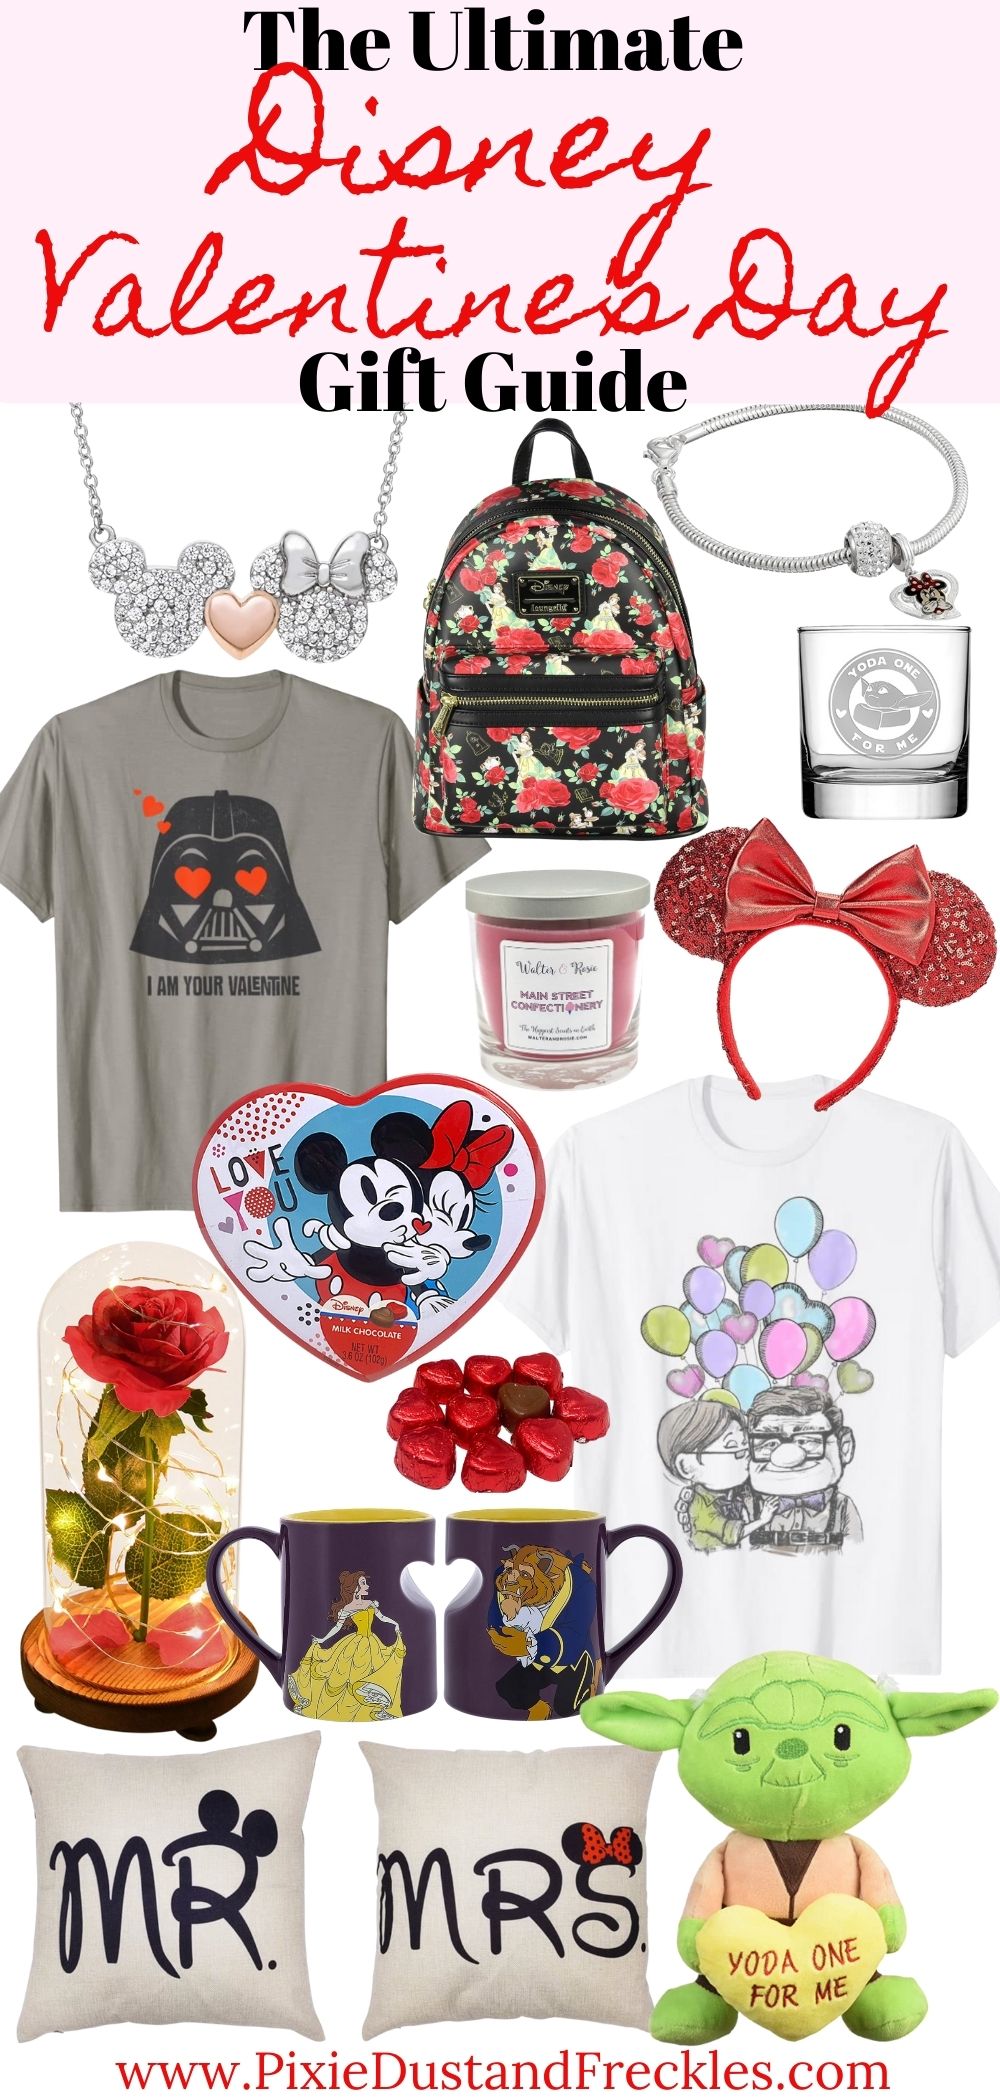 Disney's Guide to Valentine's Day